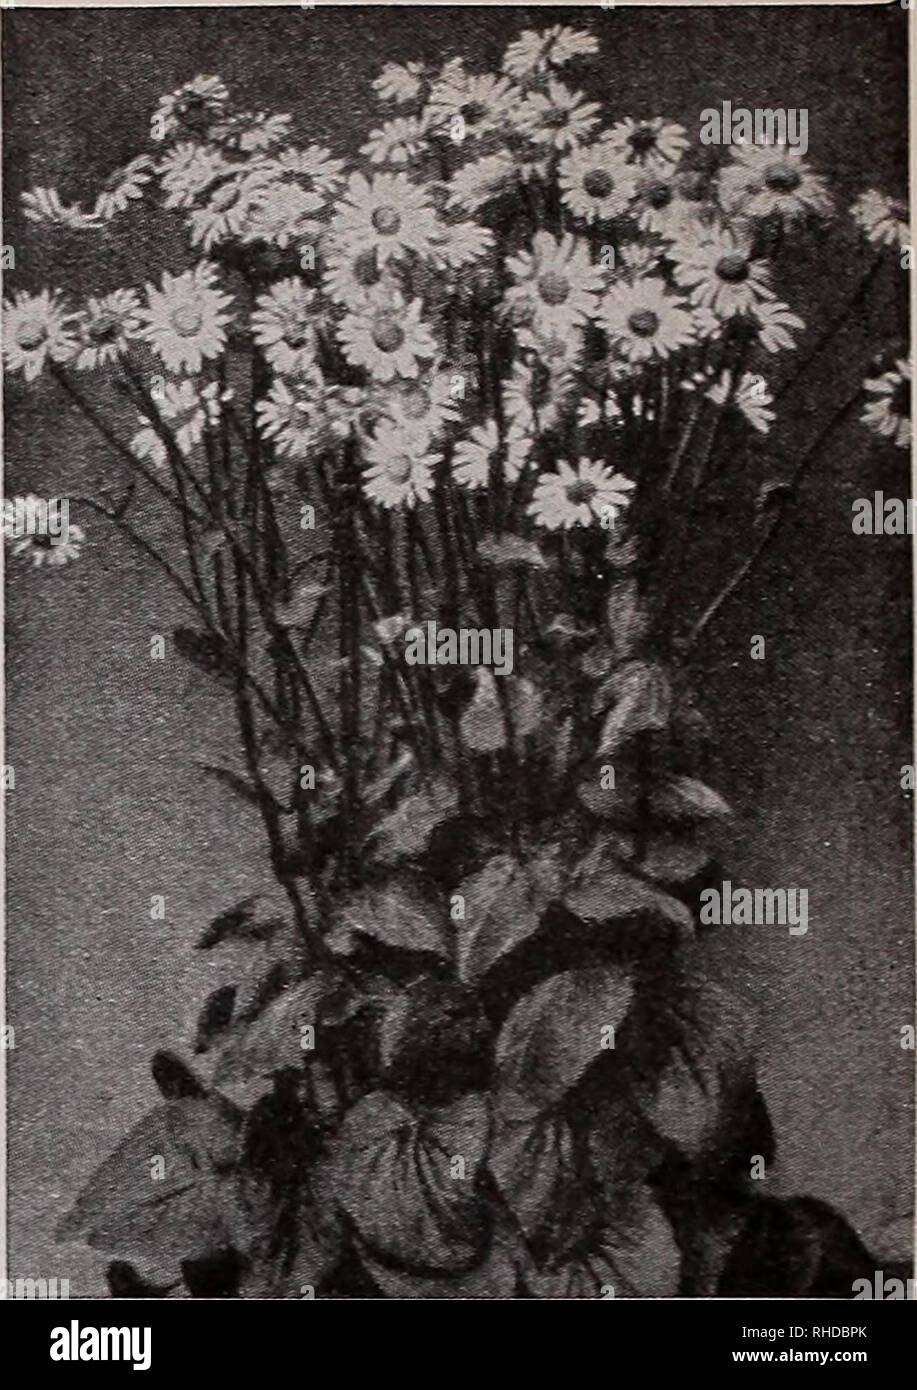 . Book for florists : spring 1939. Flowers Seeds Catalogs; Bulbs (Plants) Seedlings Catalogs; Vegetables Seeds Catalogs; Trees Seeds Catalogs; Horticulture Equipment and supplies Catalogs. DIANTHUS Neglectus Rose Cushion. DIAN THUS—Continued Neglectus X (Glacier Pink). Rose pink, 3 in 1000 seeds, §2.40; 100 seeds, 30c Rose Cushion. From a little cushion of grey-green foliage that is evergreen in character, hundreds of straight stems arise and in late May the flowers appear as if by magic. The color is pure pink, flowers about % in. across, plants about 3 to 4 in. tall. Vie oz., $1.00 $• New Bl Stock Photo